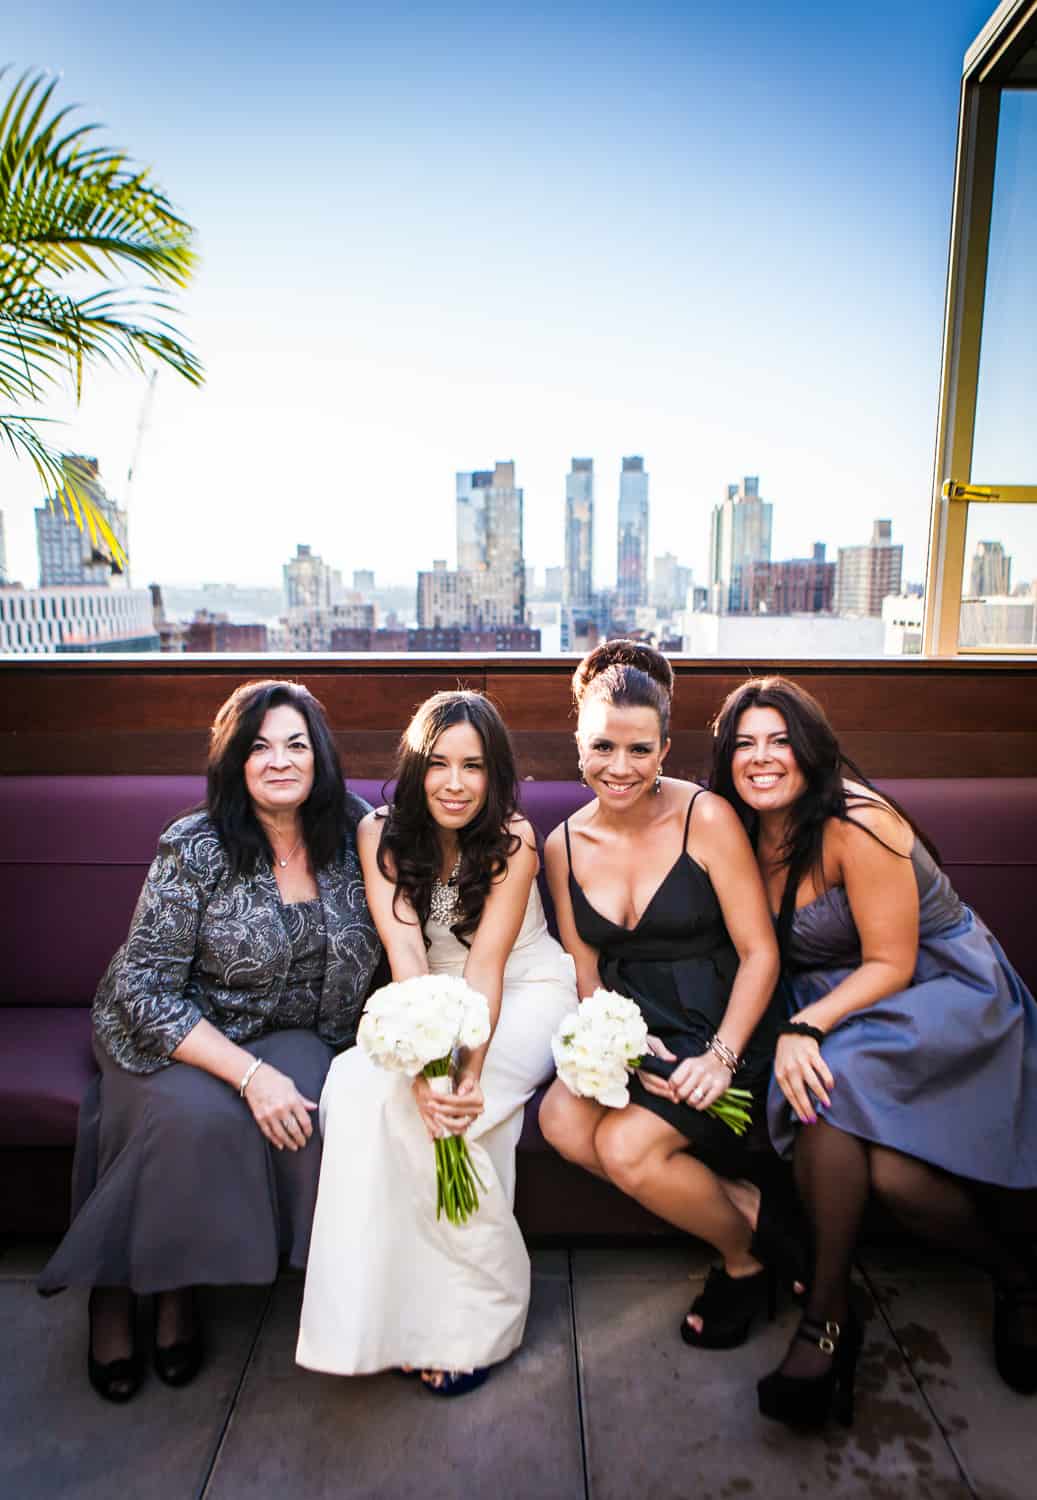 Bride and bridesmaids sitting on bench